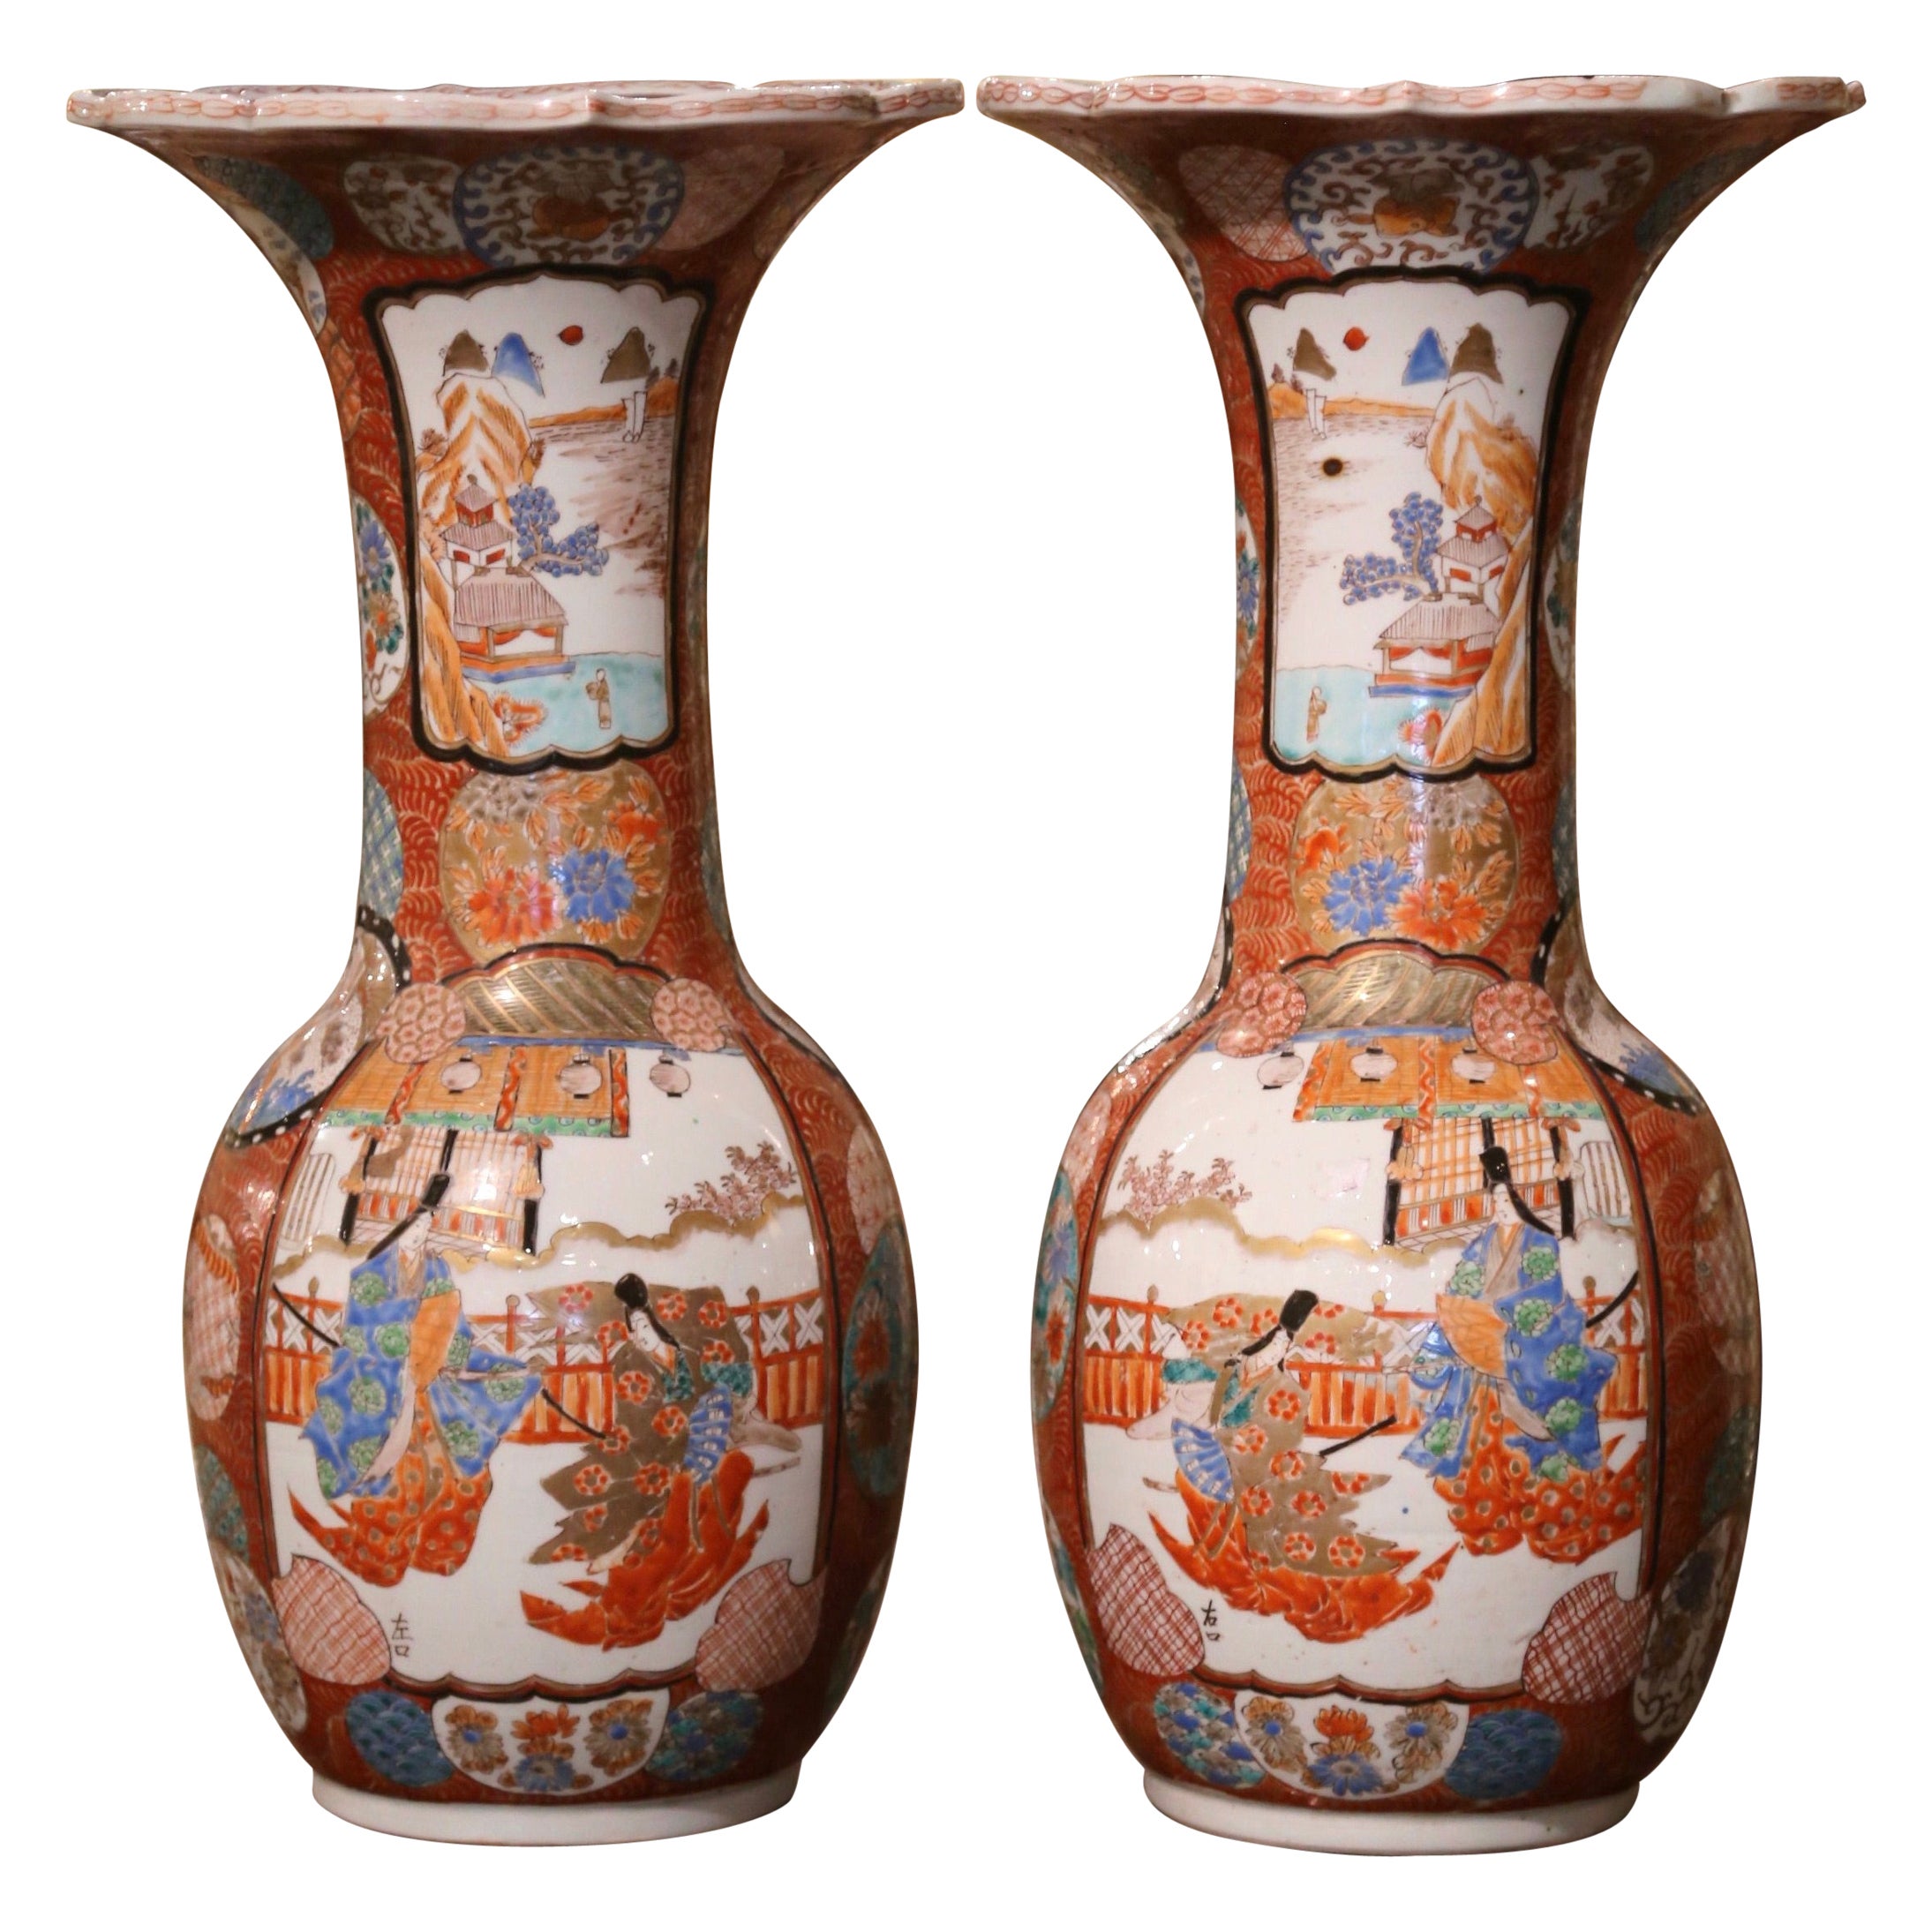 Pair of Early 20th Century Stamped Japanese Porcelain Imari Vases